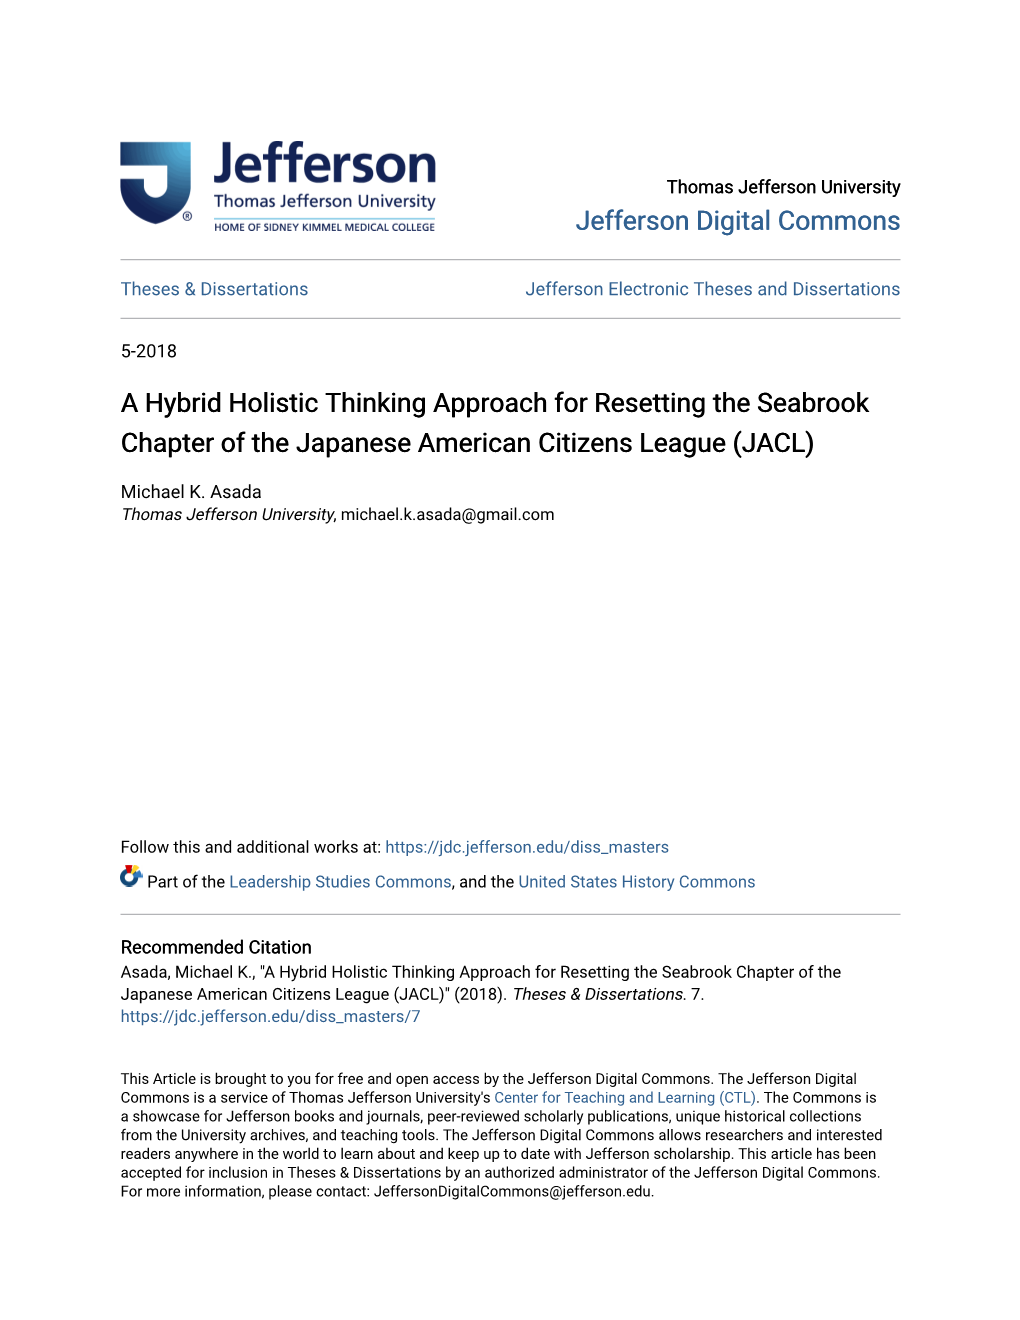 A Hybrid Holistic Thinking Approach for Resetting the Seabrook Chapter of the Japanese American Citizens League (JACL)